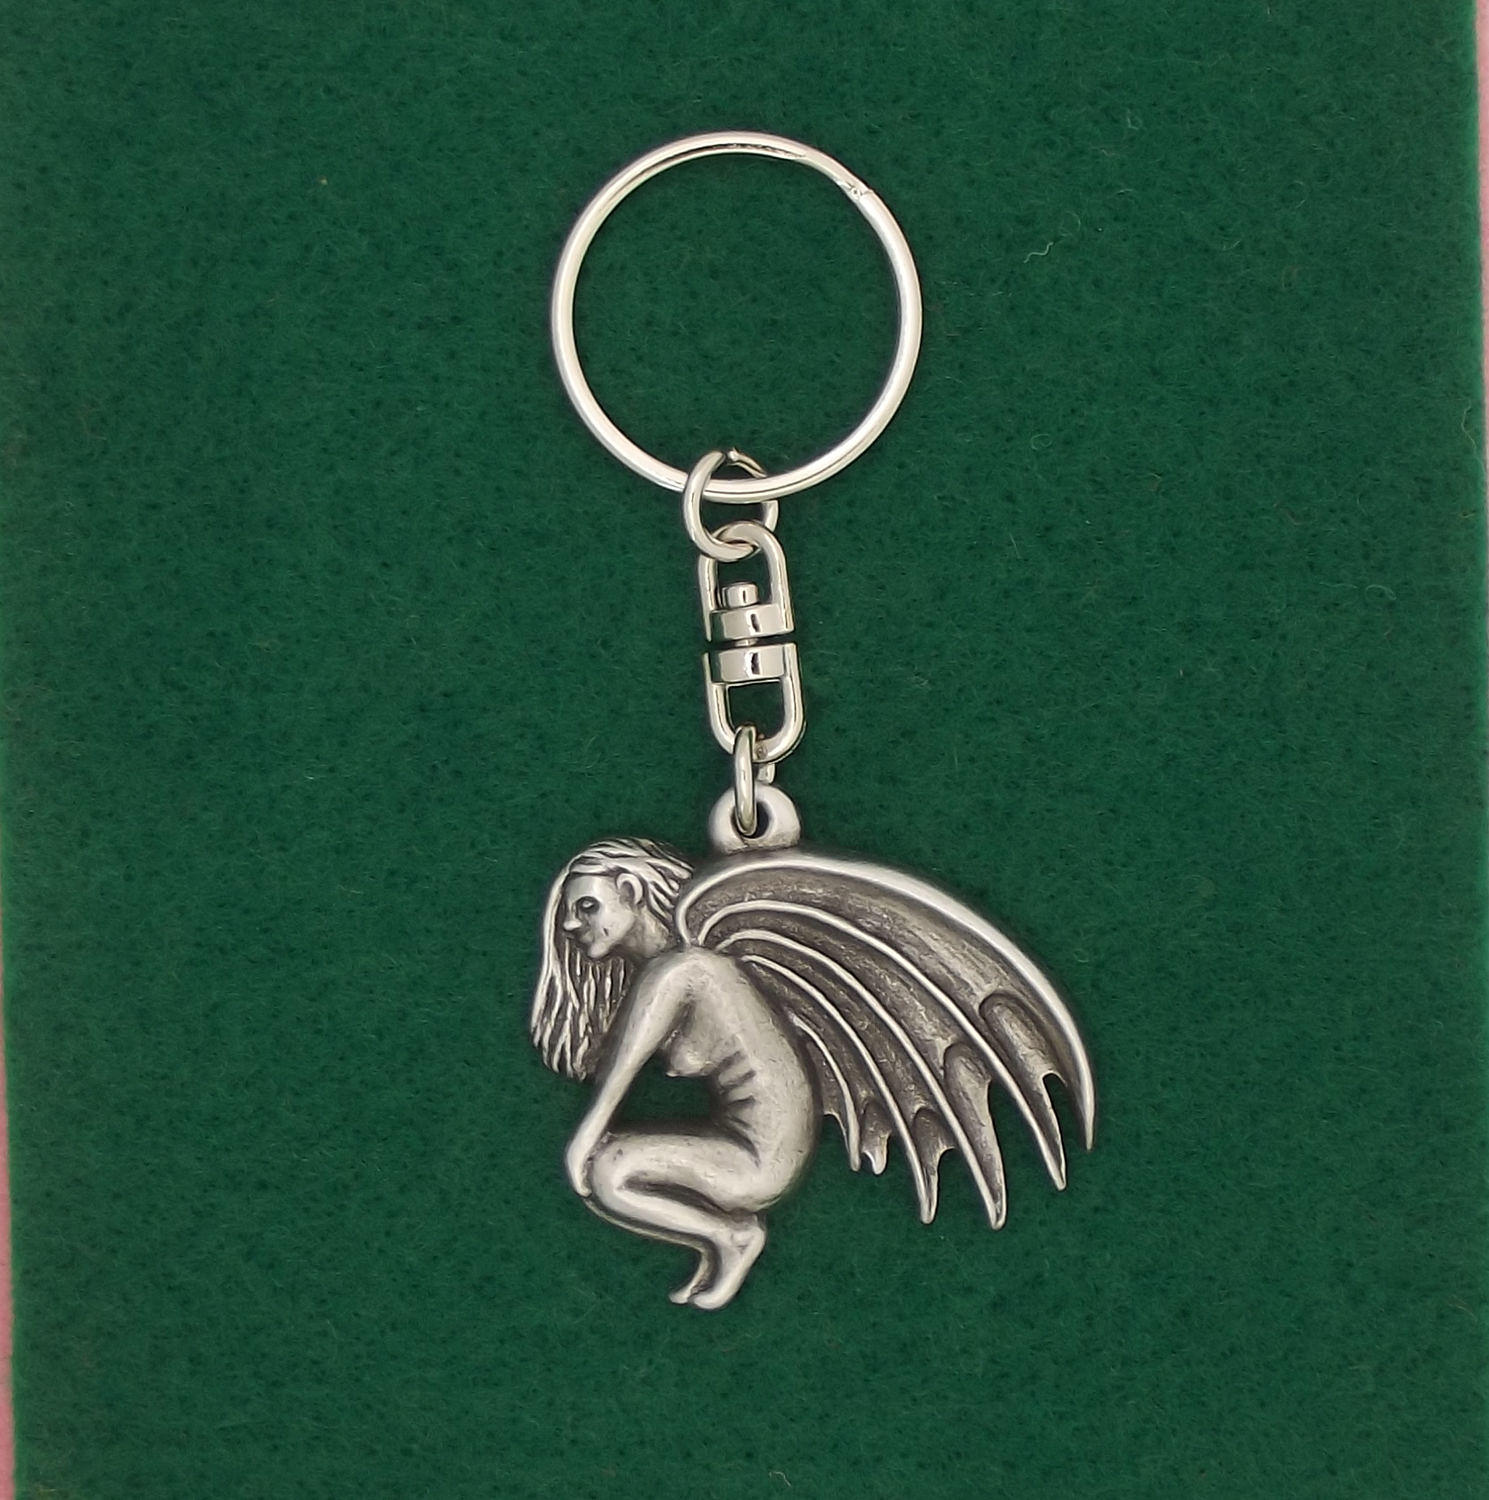 Bloody Demonic Key Ring Hand Crafted from Lead Free Pewter in the UK KR1655 